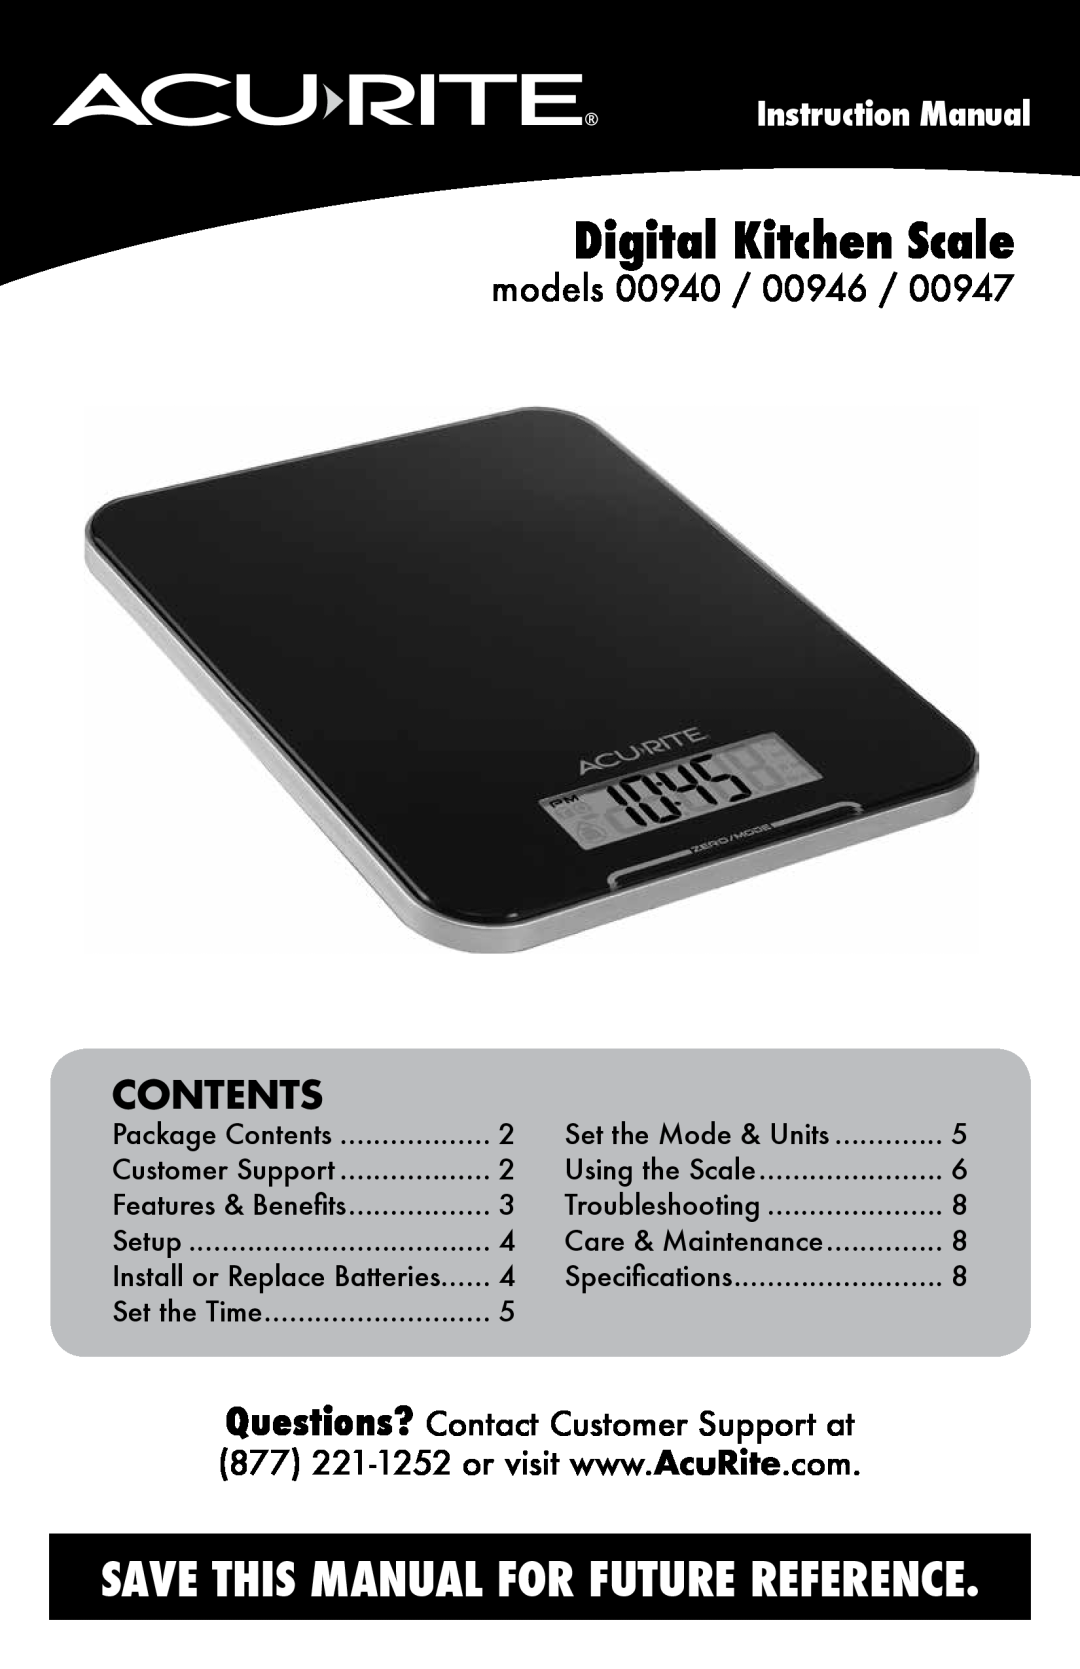 Acu-Rite 947 instruction manual Contents, models 00940 / 00946, Instruction Manual, Digital Kitchen Scale 